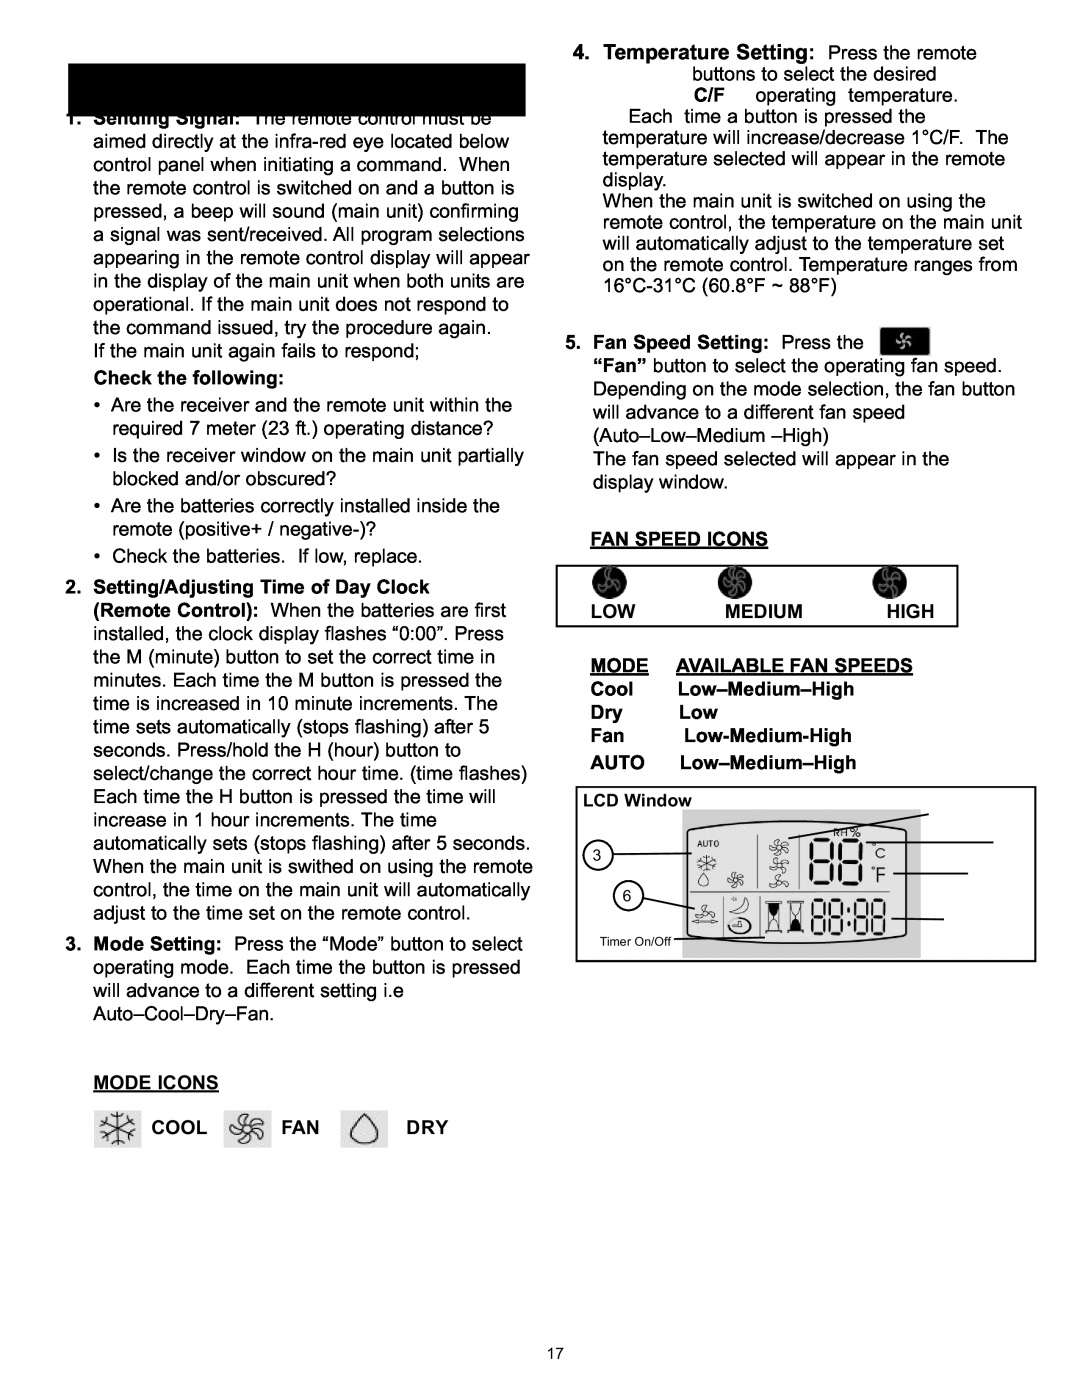 Danby DPAC120061 Remote Control Operating Instructions, Check the following, Mode Icons Cool Fan Dry, Fan Speed Icons 